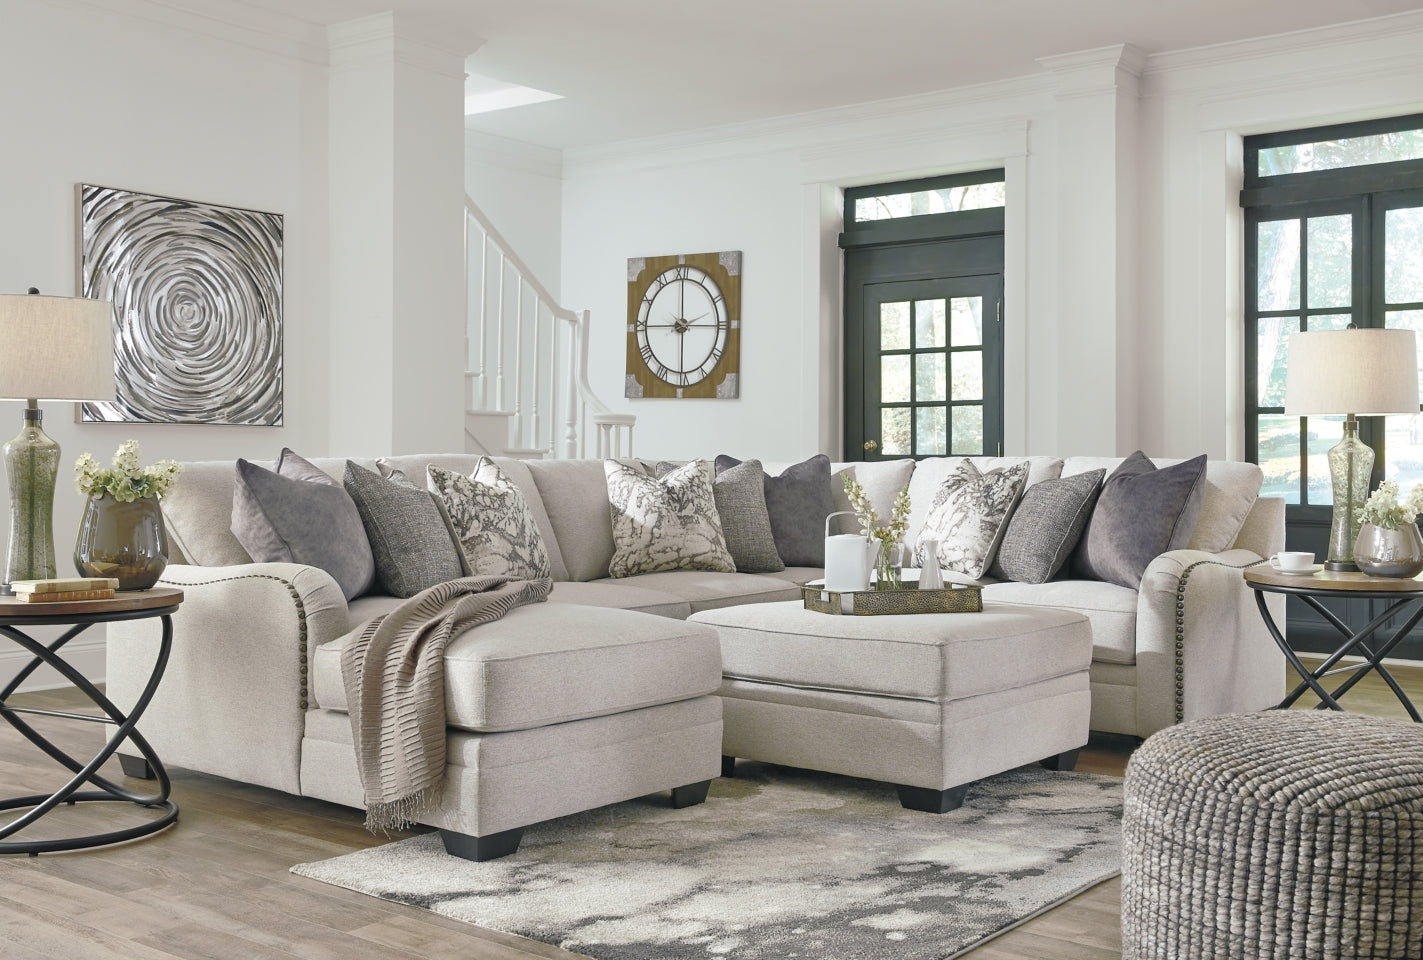 Dellara 4-Piece Sectional with Ottoman - PKG001115 - furniture place usa